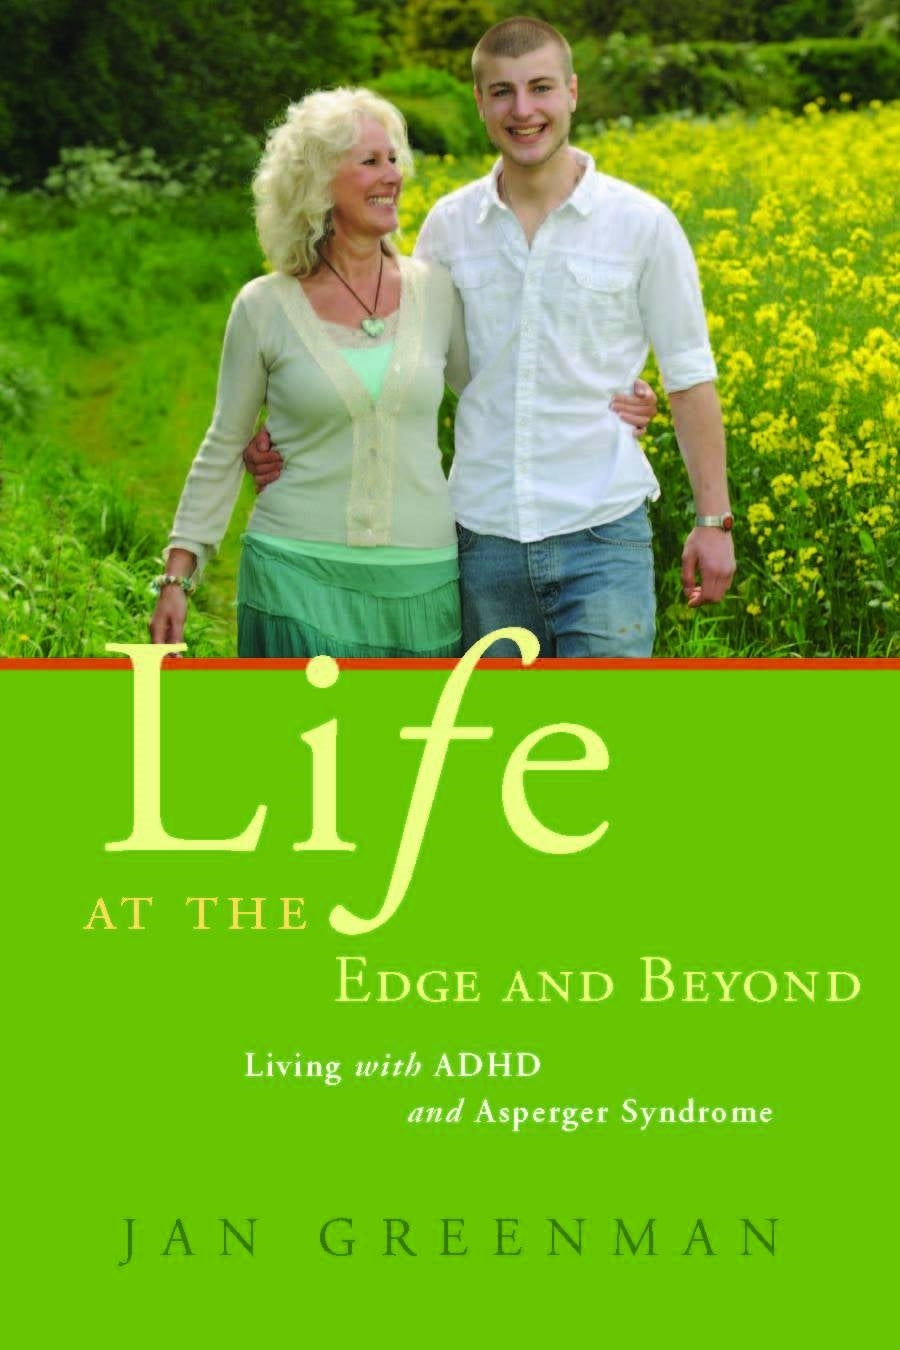 Life at the Edge and Beyond by Jan Greenman